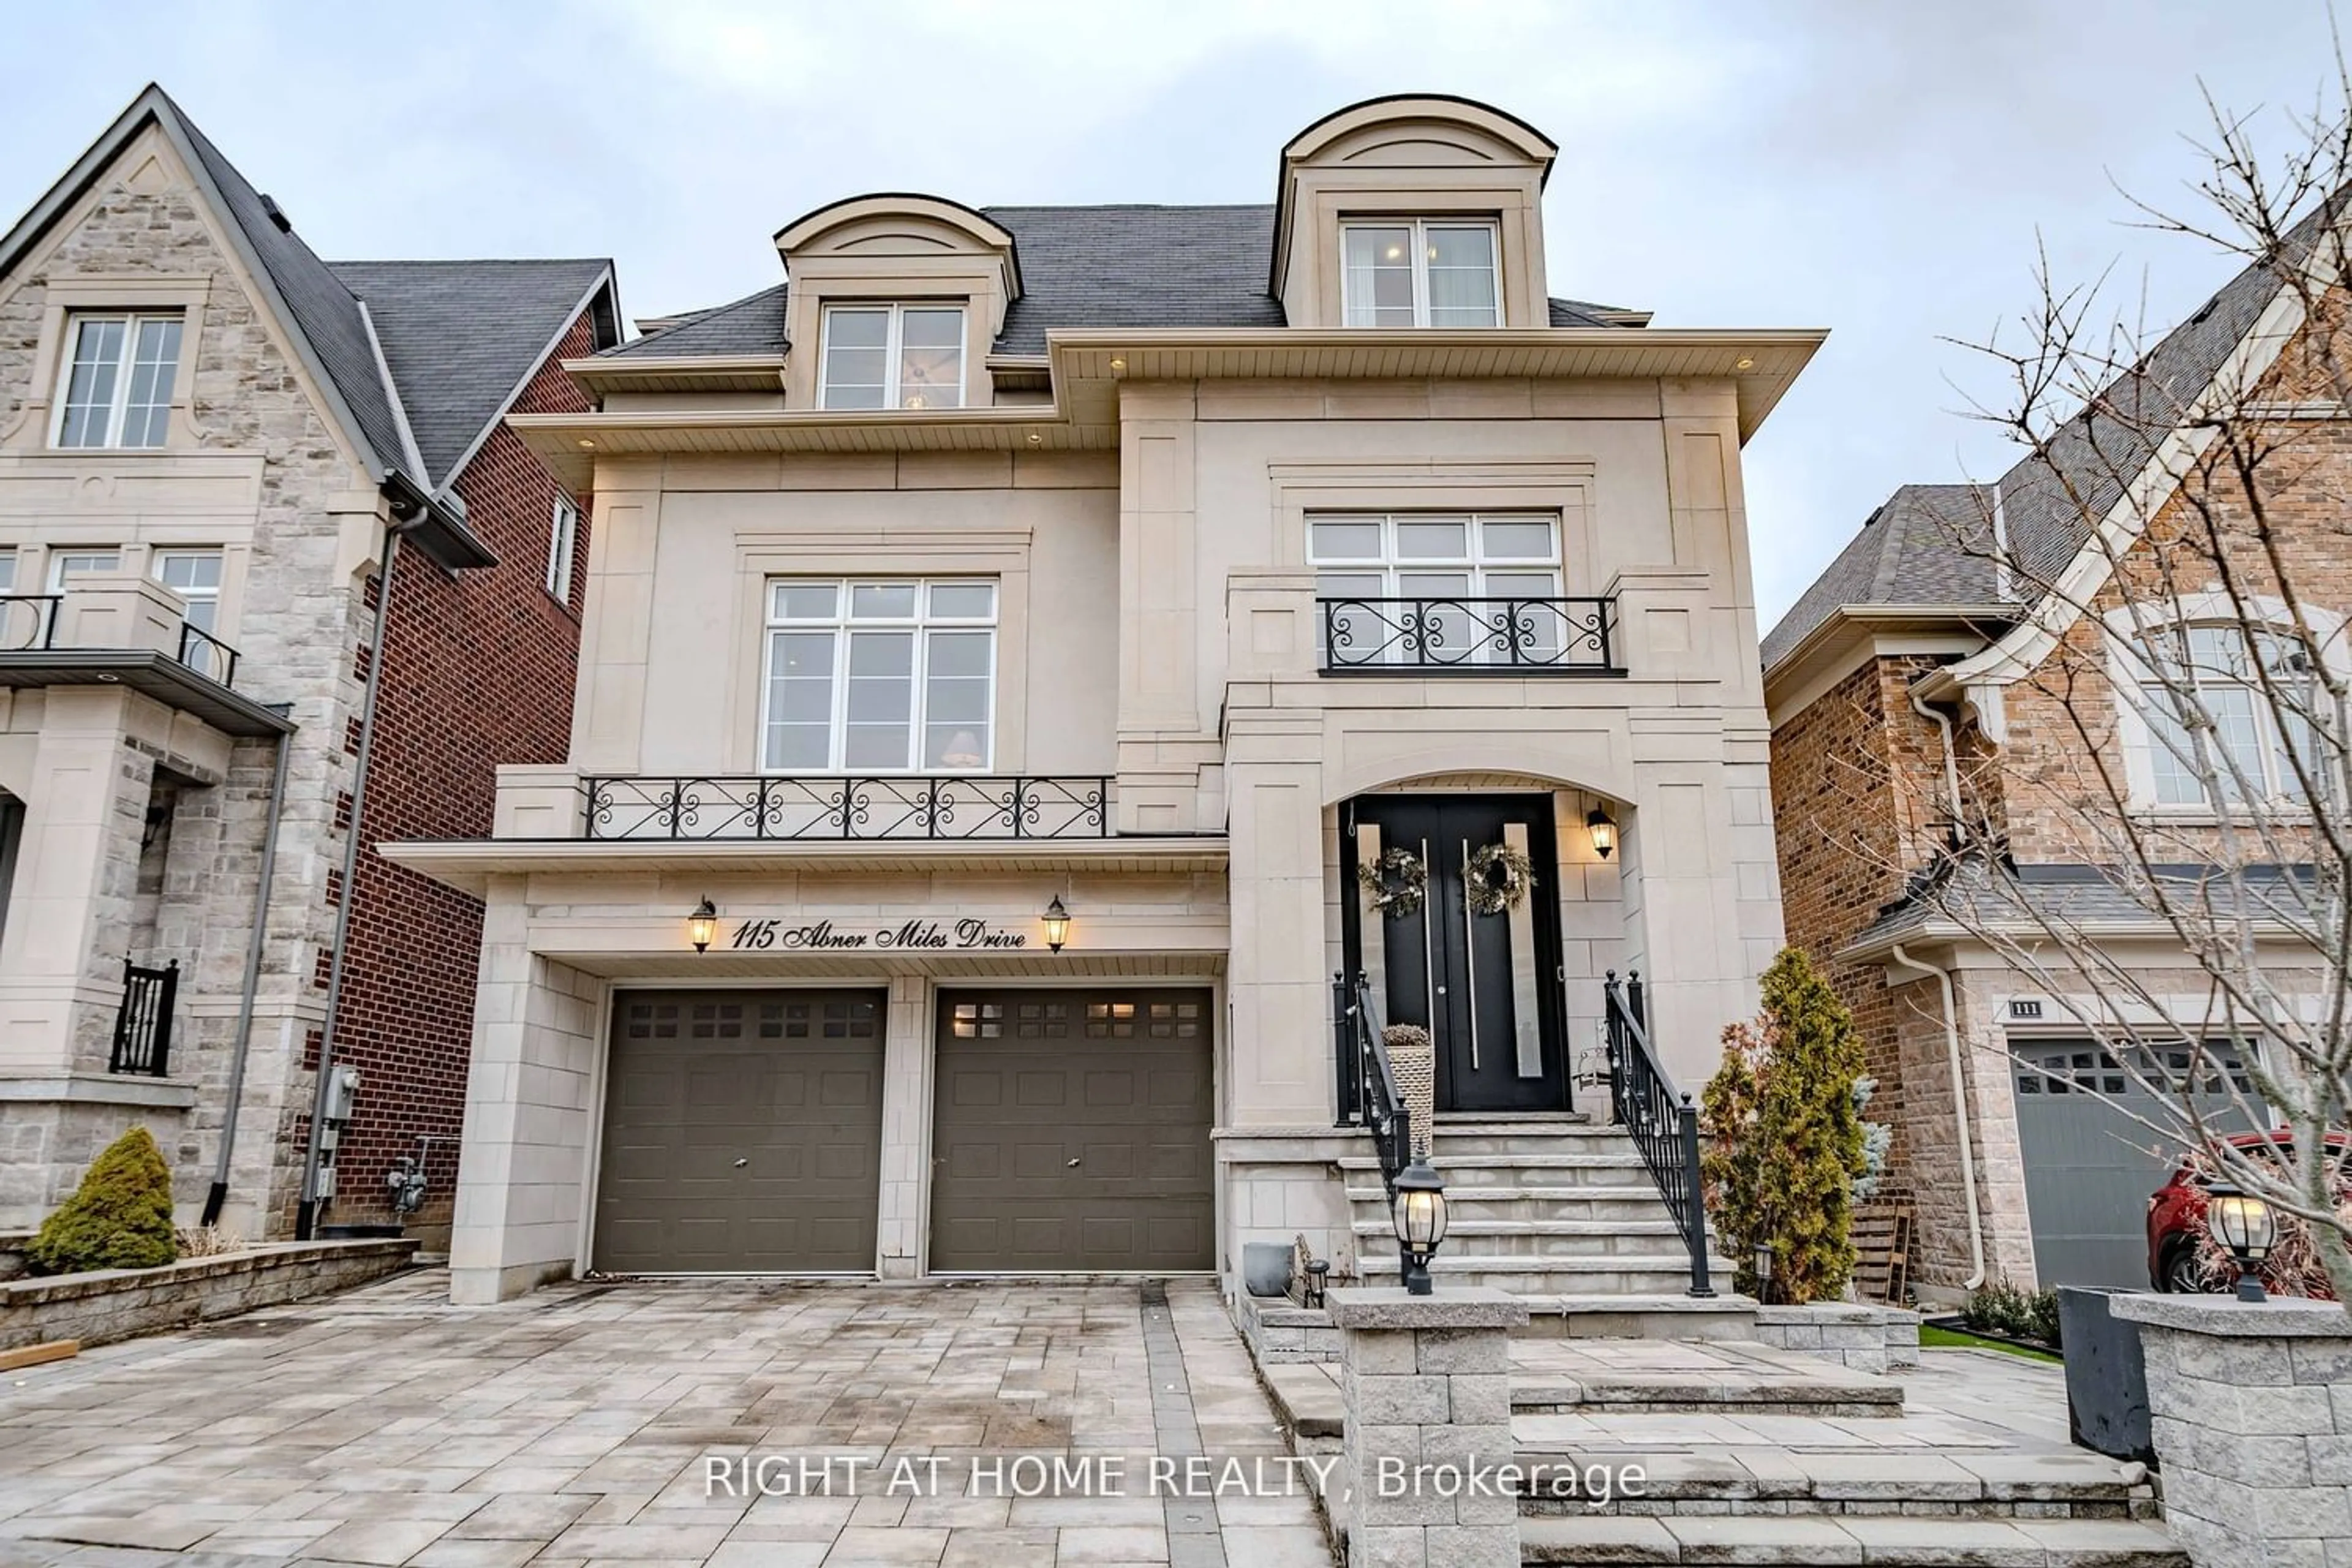 Home with brick exterior material for 115 Abner Miles Dr, Vaughan Ontario L6A 0J1